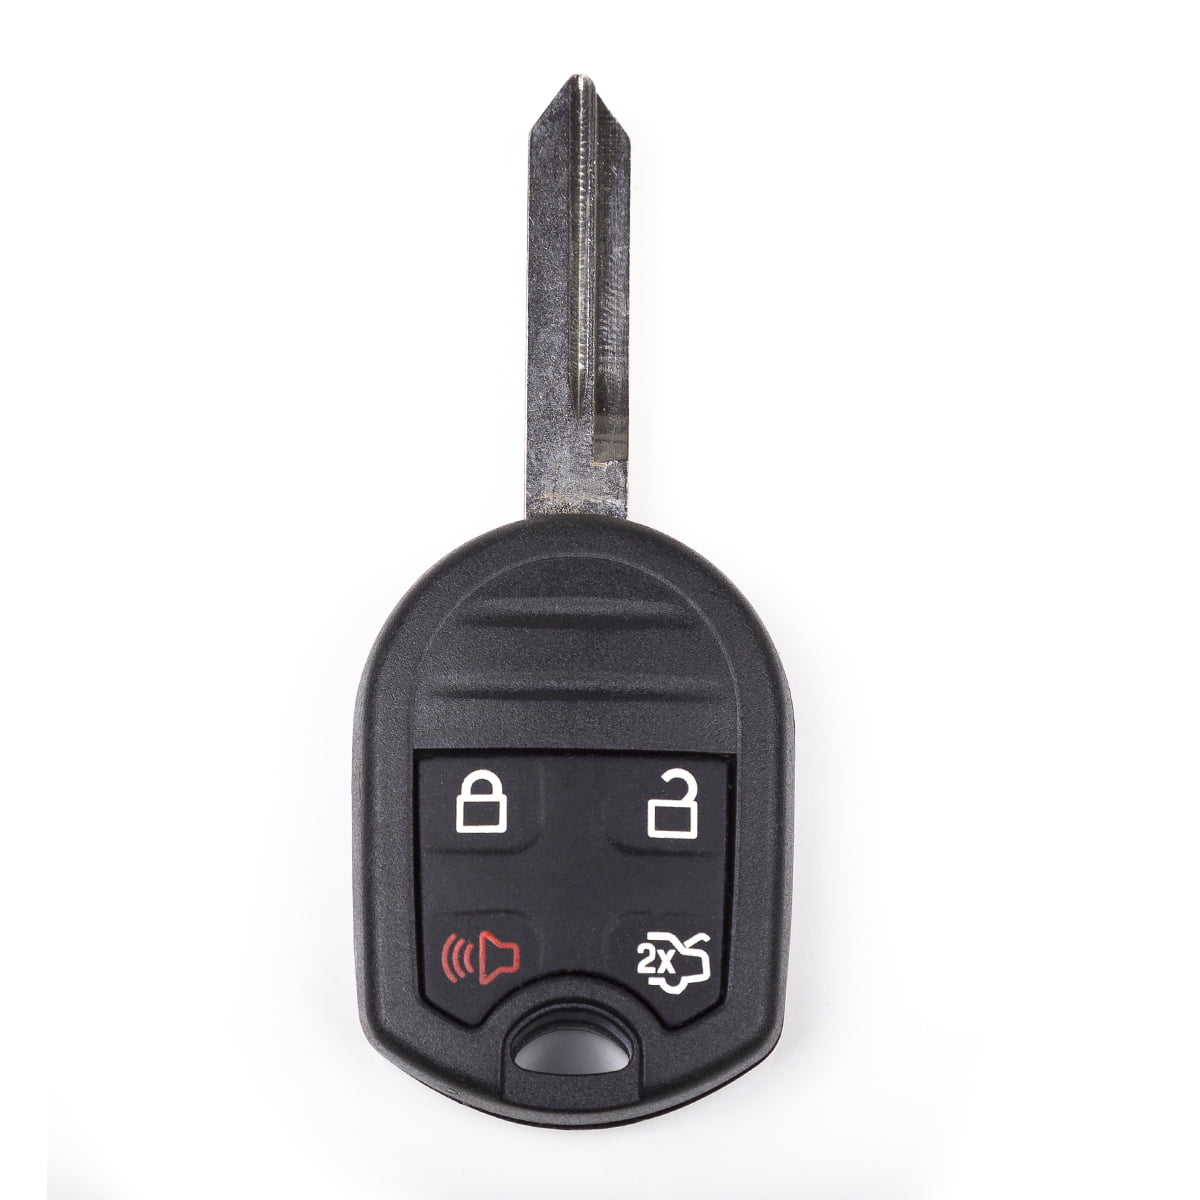 2 For 2006 2007 2008 2009 2010 2011 2012 Ford Focus Fusion Car Remote Key Fob 